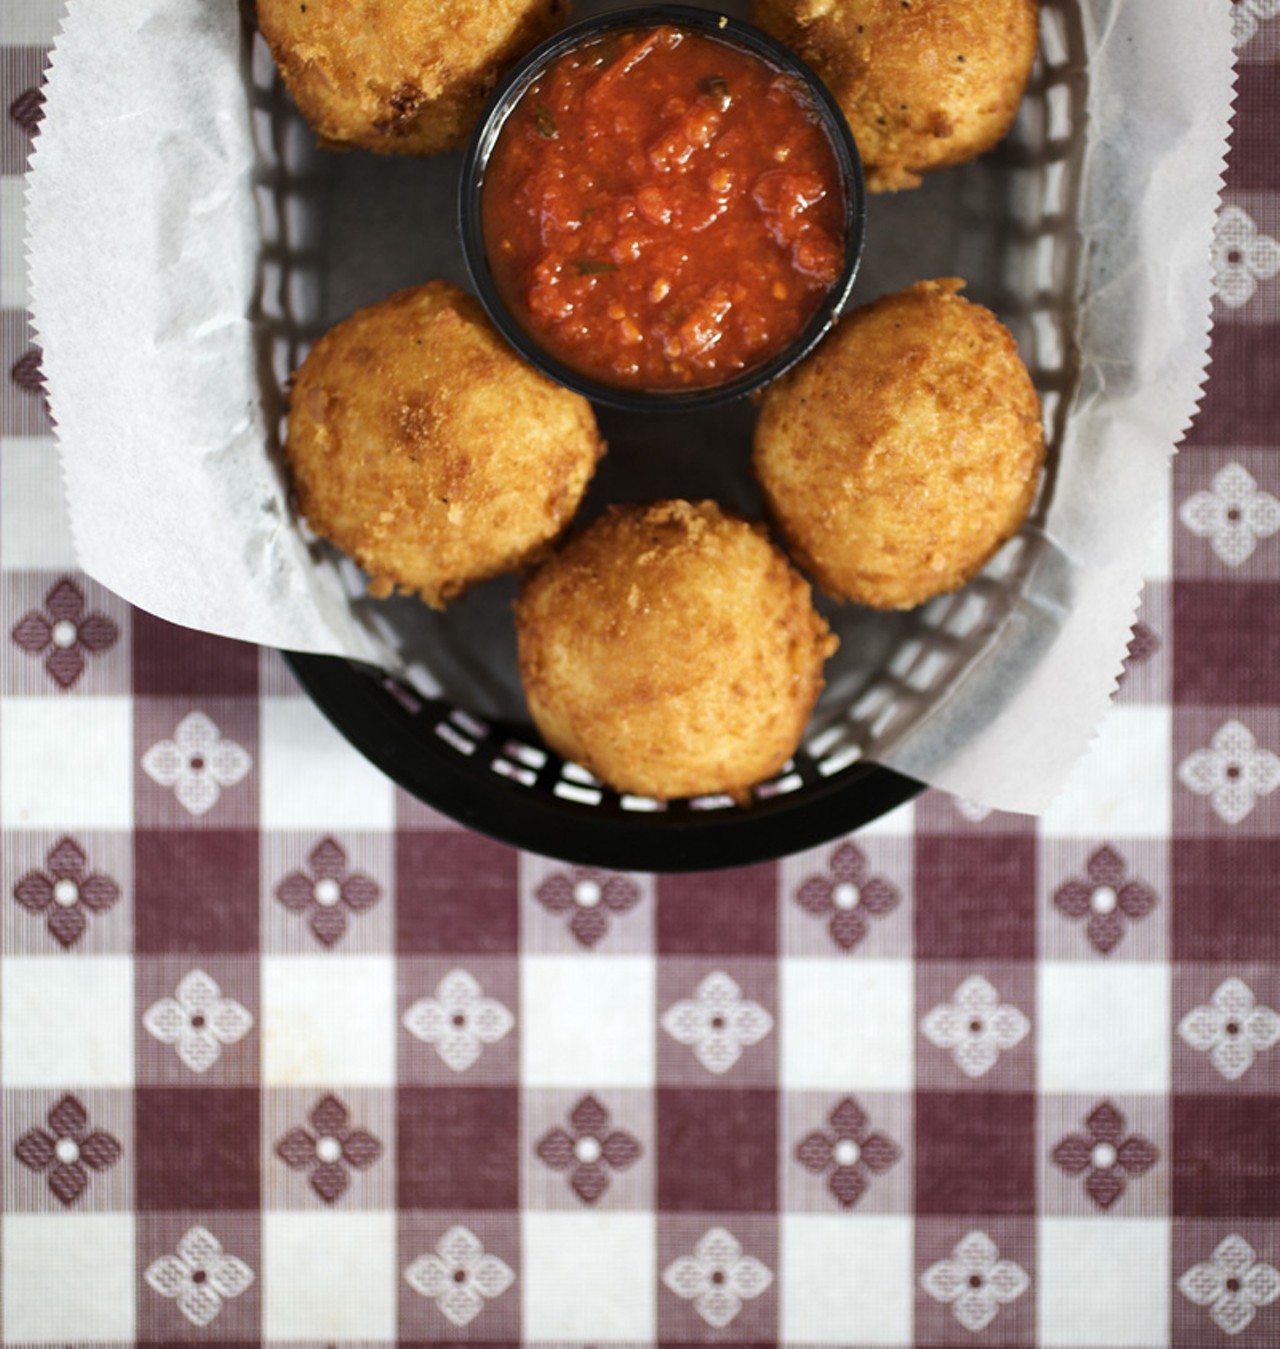 The Arancini appetizer is a Filomena's house specialty. They are housemade risotto croquettes, flash fried with a melted cheese center and served with marinara sauce.